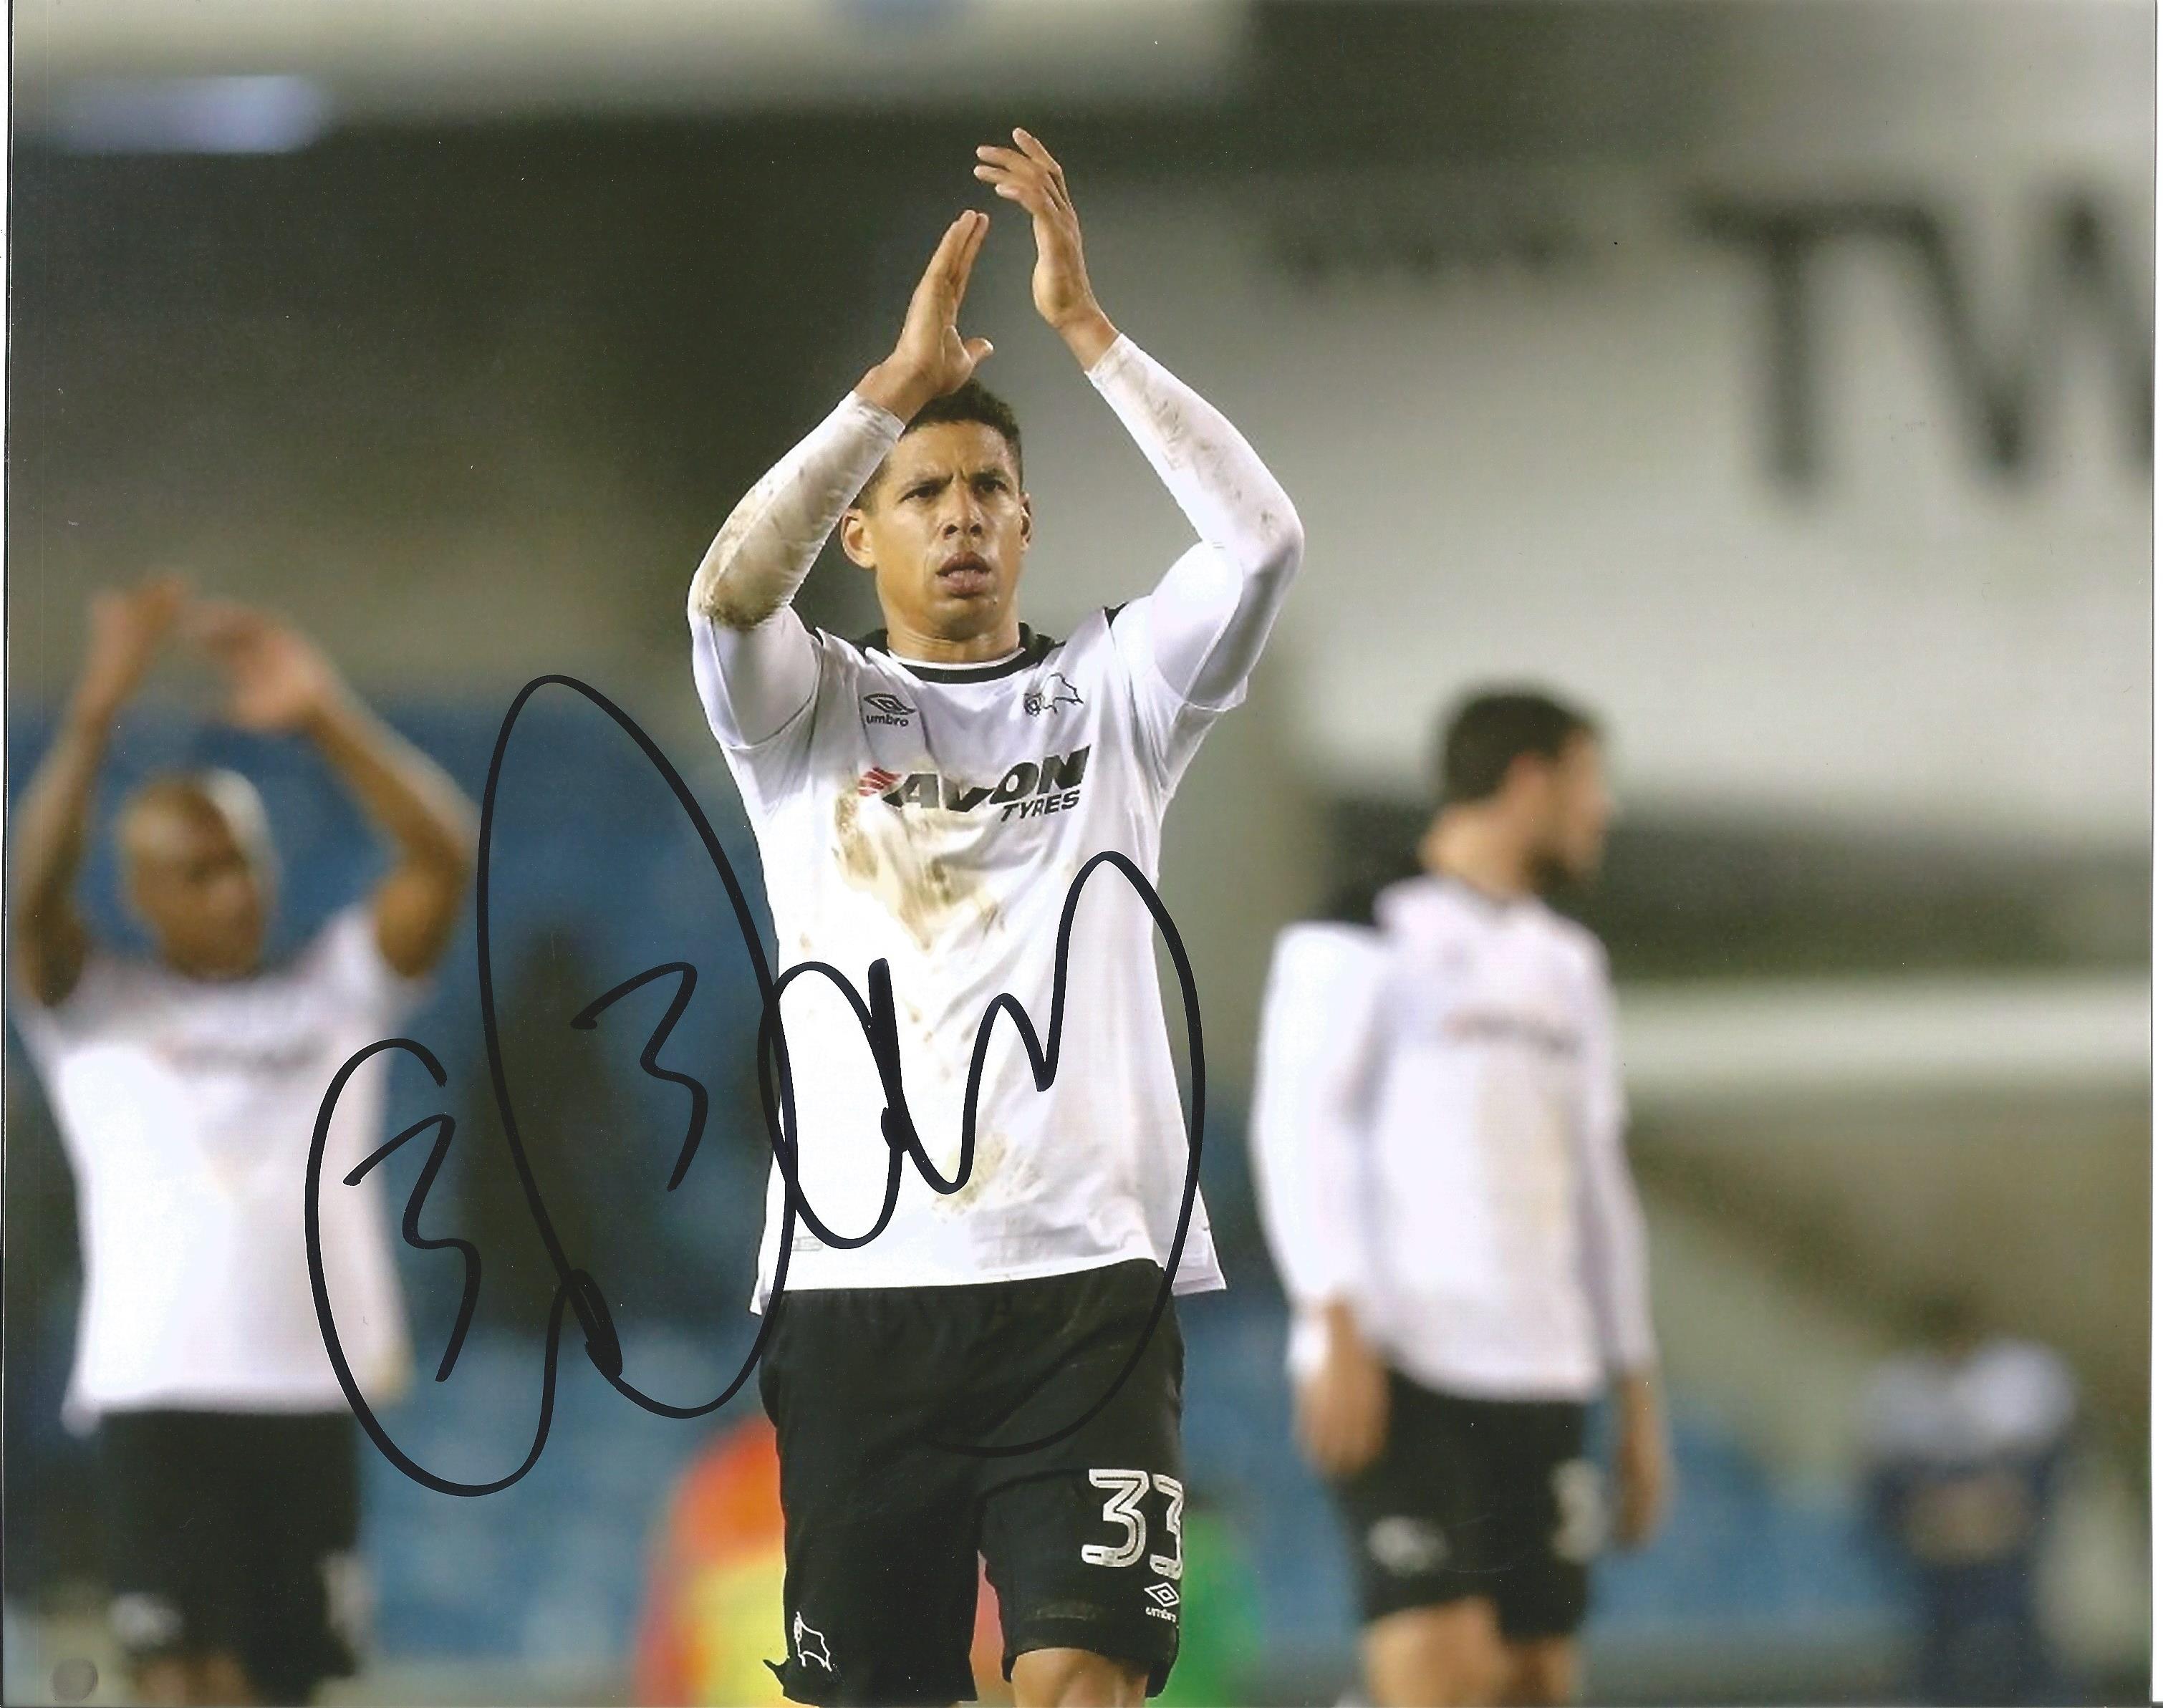 Curtis Davis Signed Derby County 8x10 football photo. Good Condition. All autographs are genuine